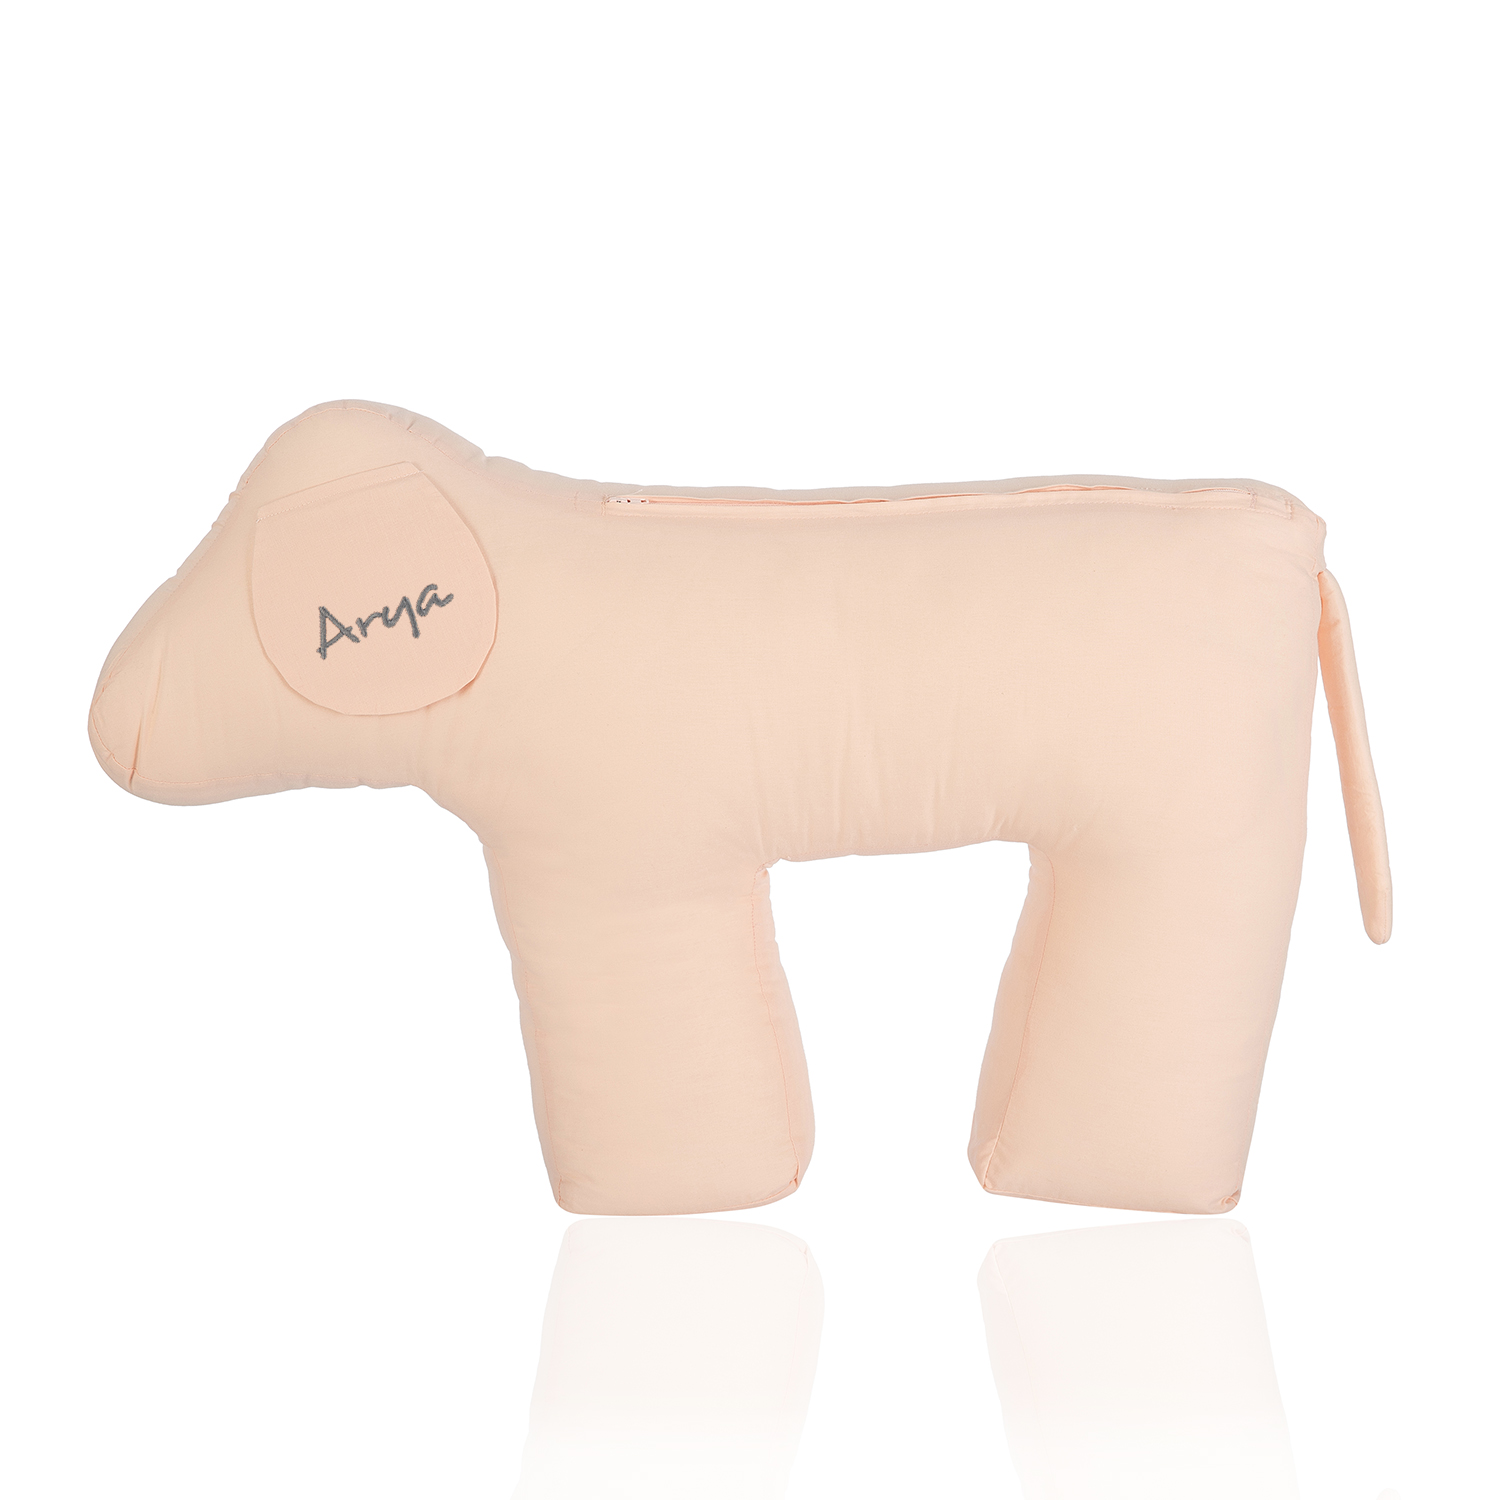 Doggy-Personalized-Nursing-Pillow-Salmon-1.png